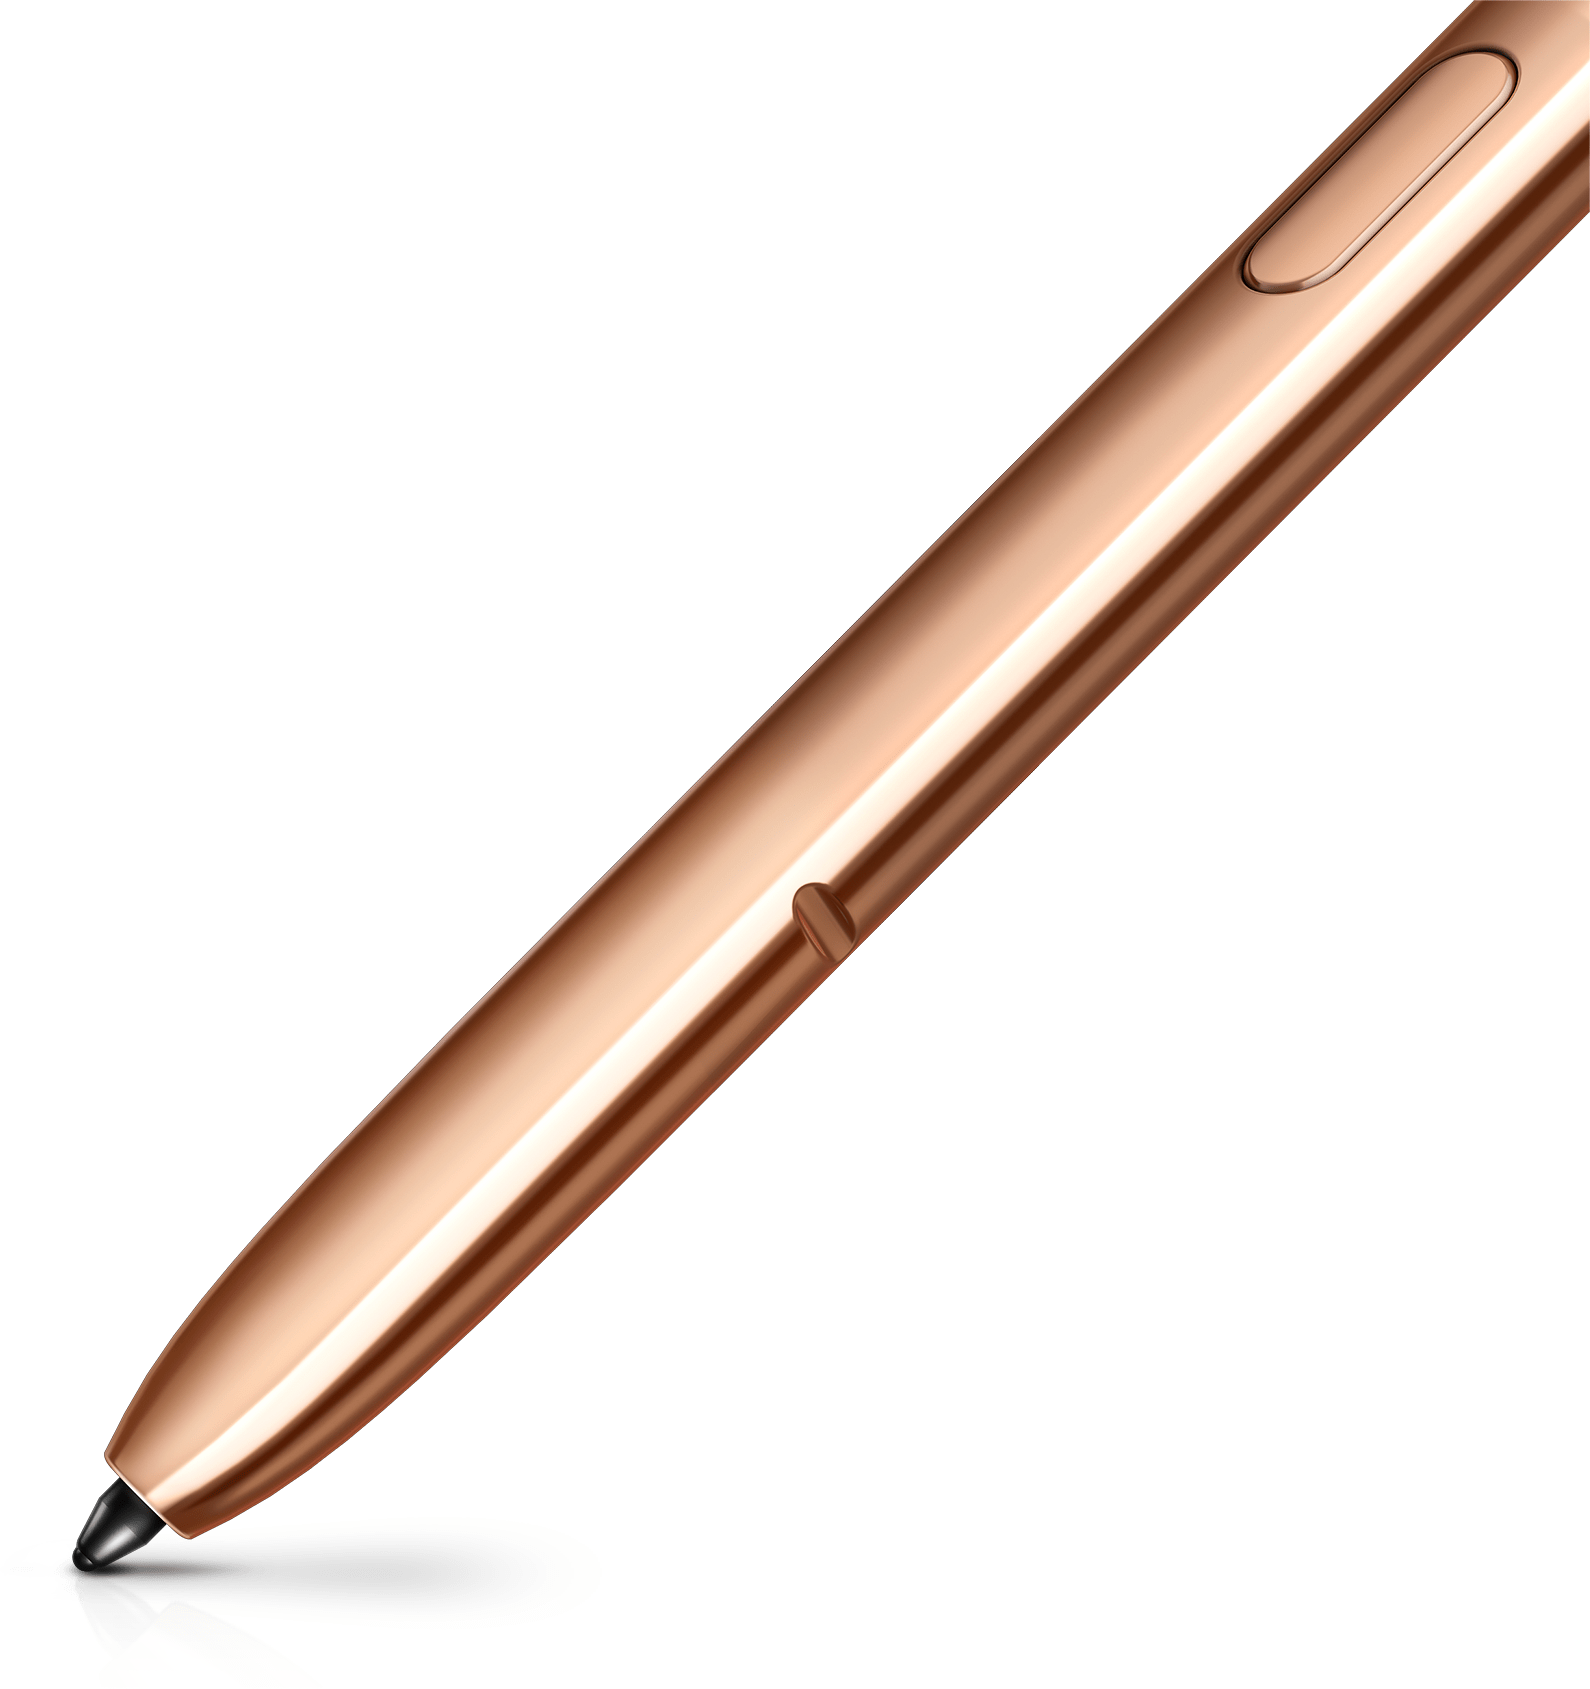 Extreme closeup of the lower portion of the bronze S Pen, showing its precise tip. There is a streak of bronze following the tip.